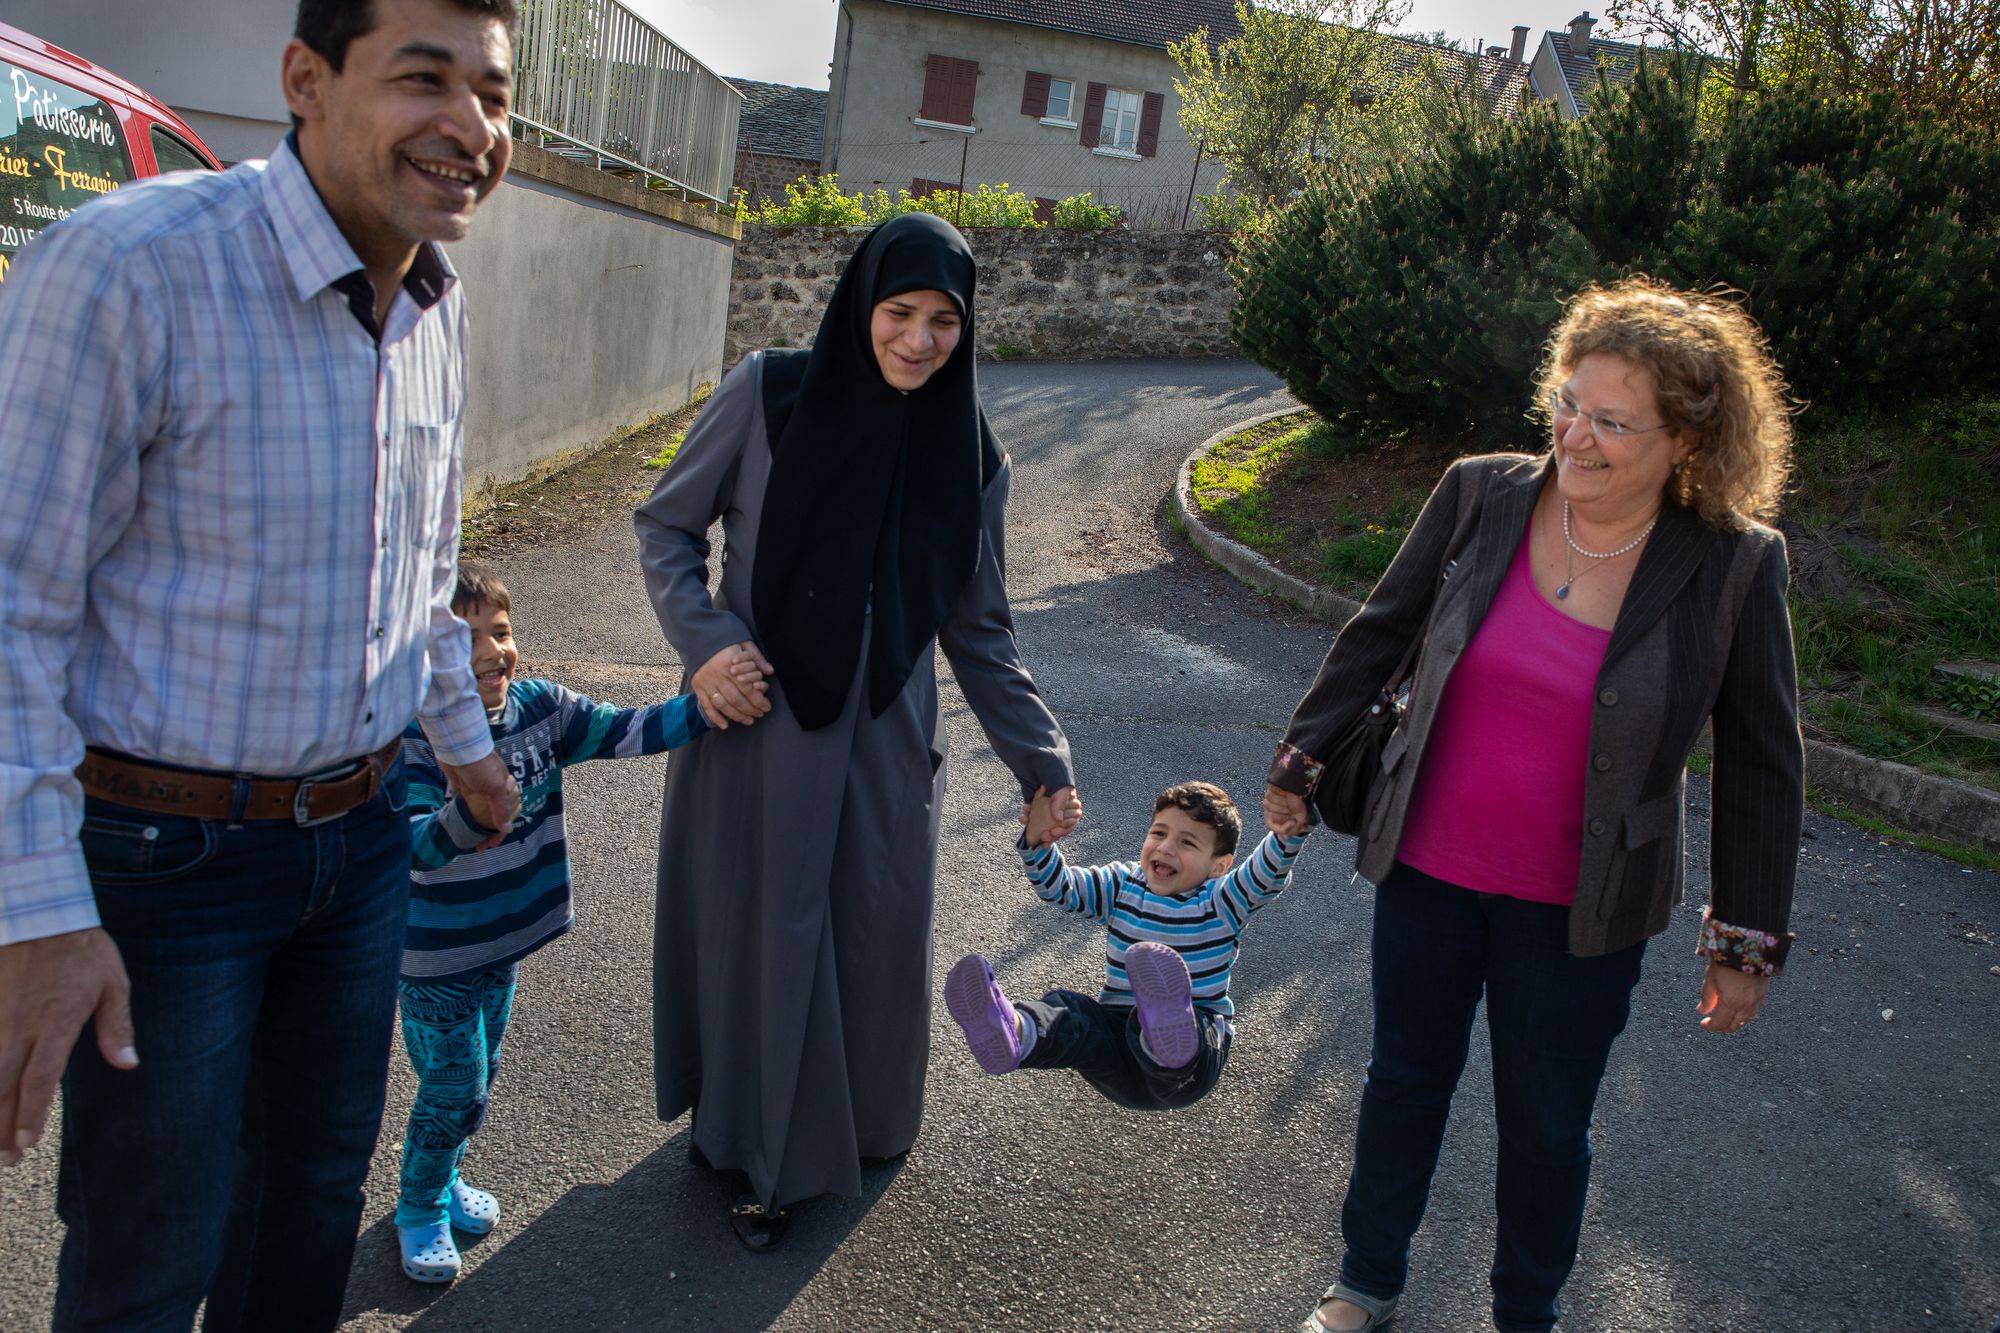 Family members of Marianne Bouvier-Mermet (far right), were honored for hiding Jewish refugees during World War II. She carries on that tradition by working with refugees including this Syrian family of Ahmed, his pregnant wife, Ibtesam, and their two children, Mohamed-Nour (5) and Abdurrhaman (3).   Bouvier-Mermet has helped them since their arrival last winter, including letting them live in an apartment she owns. After the horror the Syrian family faced in their hometown of Alleppo and spending several years in a Turkish refugee camp, they are happy with their life in Mazet-Saint-Voy, “Everybody here says bonjour to you,” explains Ahmed. For Marianne helping them and other refugee families is part of the history of the Plateau. “For us it is necessary that this past serve the present, and that the reception of the humble inhabitants of the Plateau is an example for now.” She said. Image by Lucian Perkins. France, 2018.